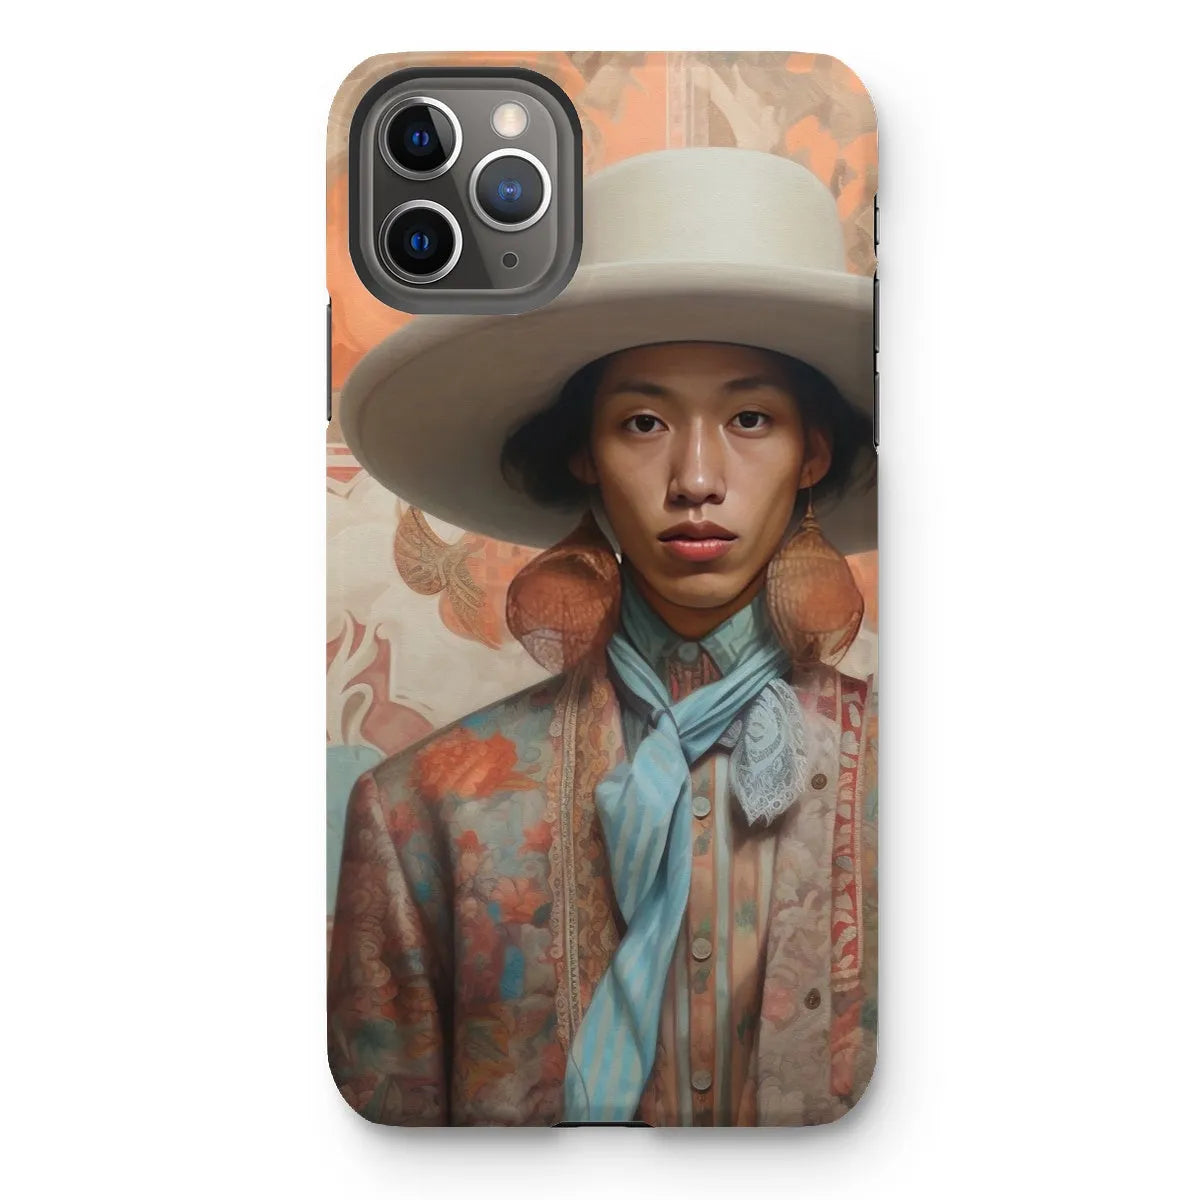 Iyaan The Gay Cowboy - Dandy Gay Aesthetic Art Phone Case - Iphone 11 Pro Max / Matte - Mobile Phone Cases - Aesthetic